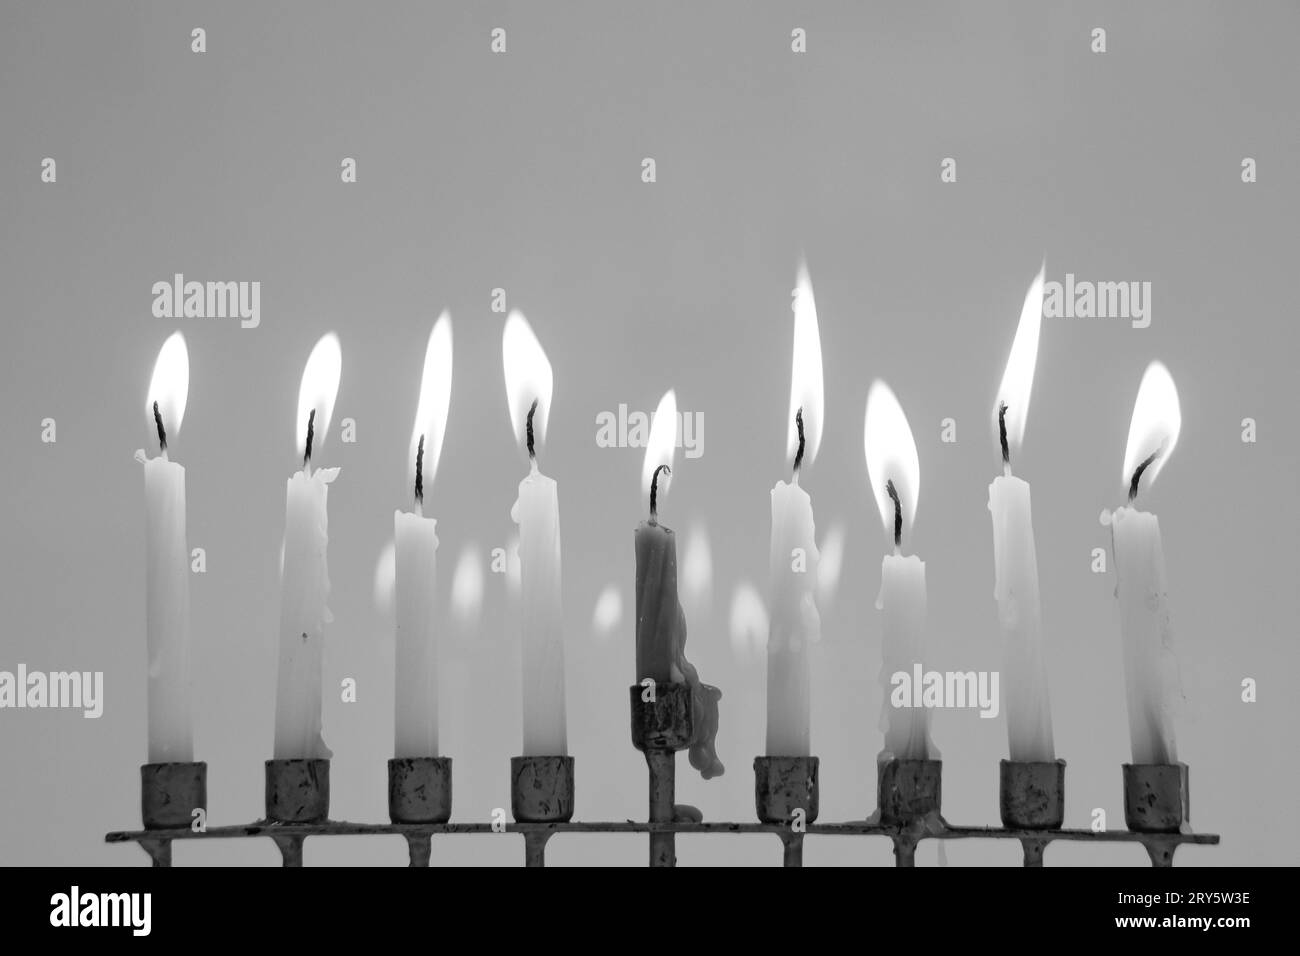 Black and white full menorah on the last night of Hanukkah. All nine candles are lit and reflecting in the background. Holiday concept Stock Photo